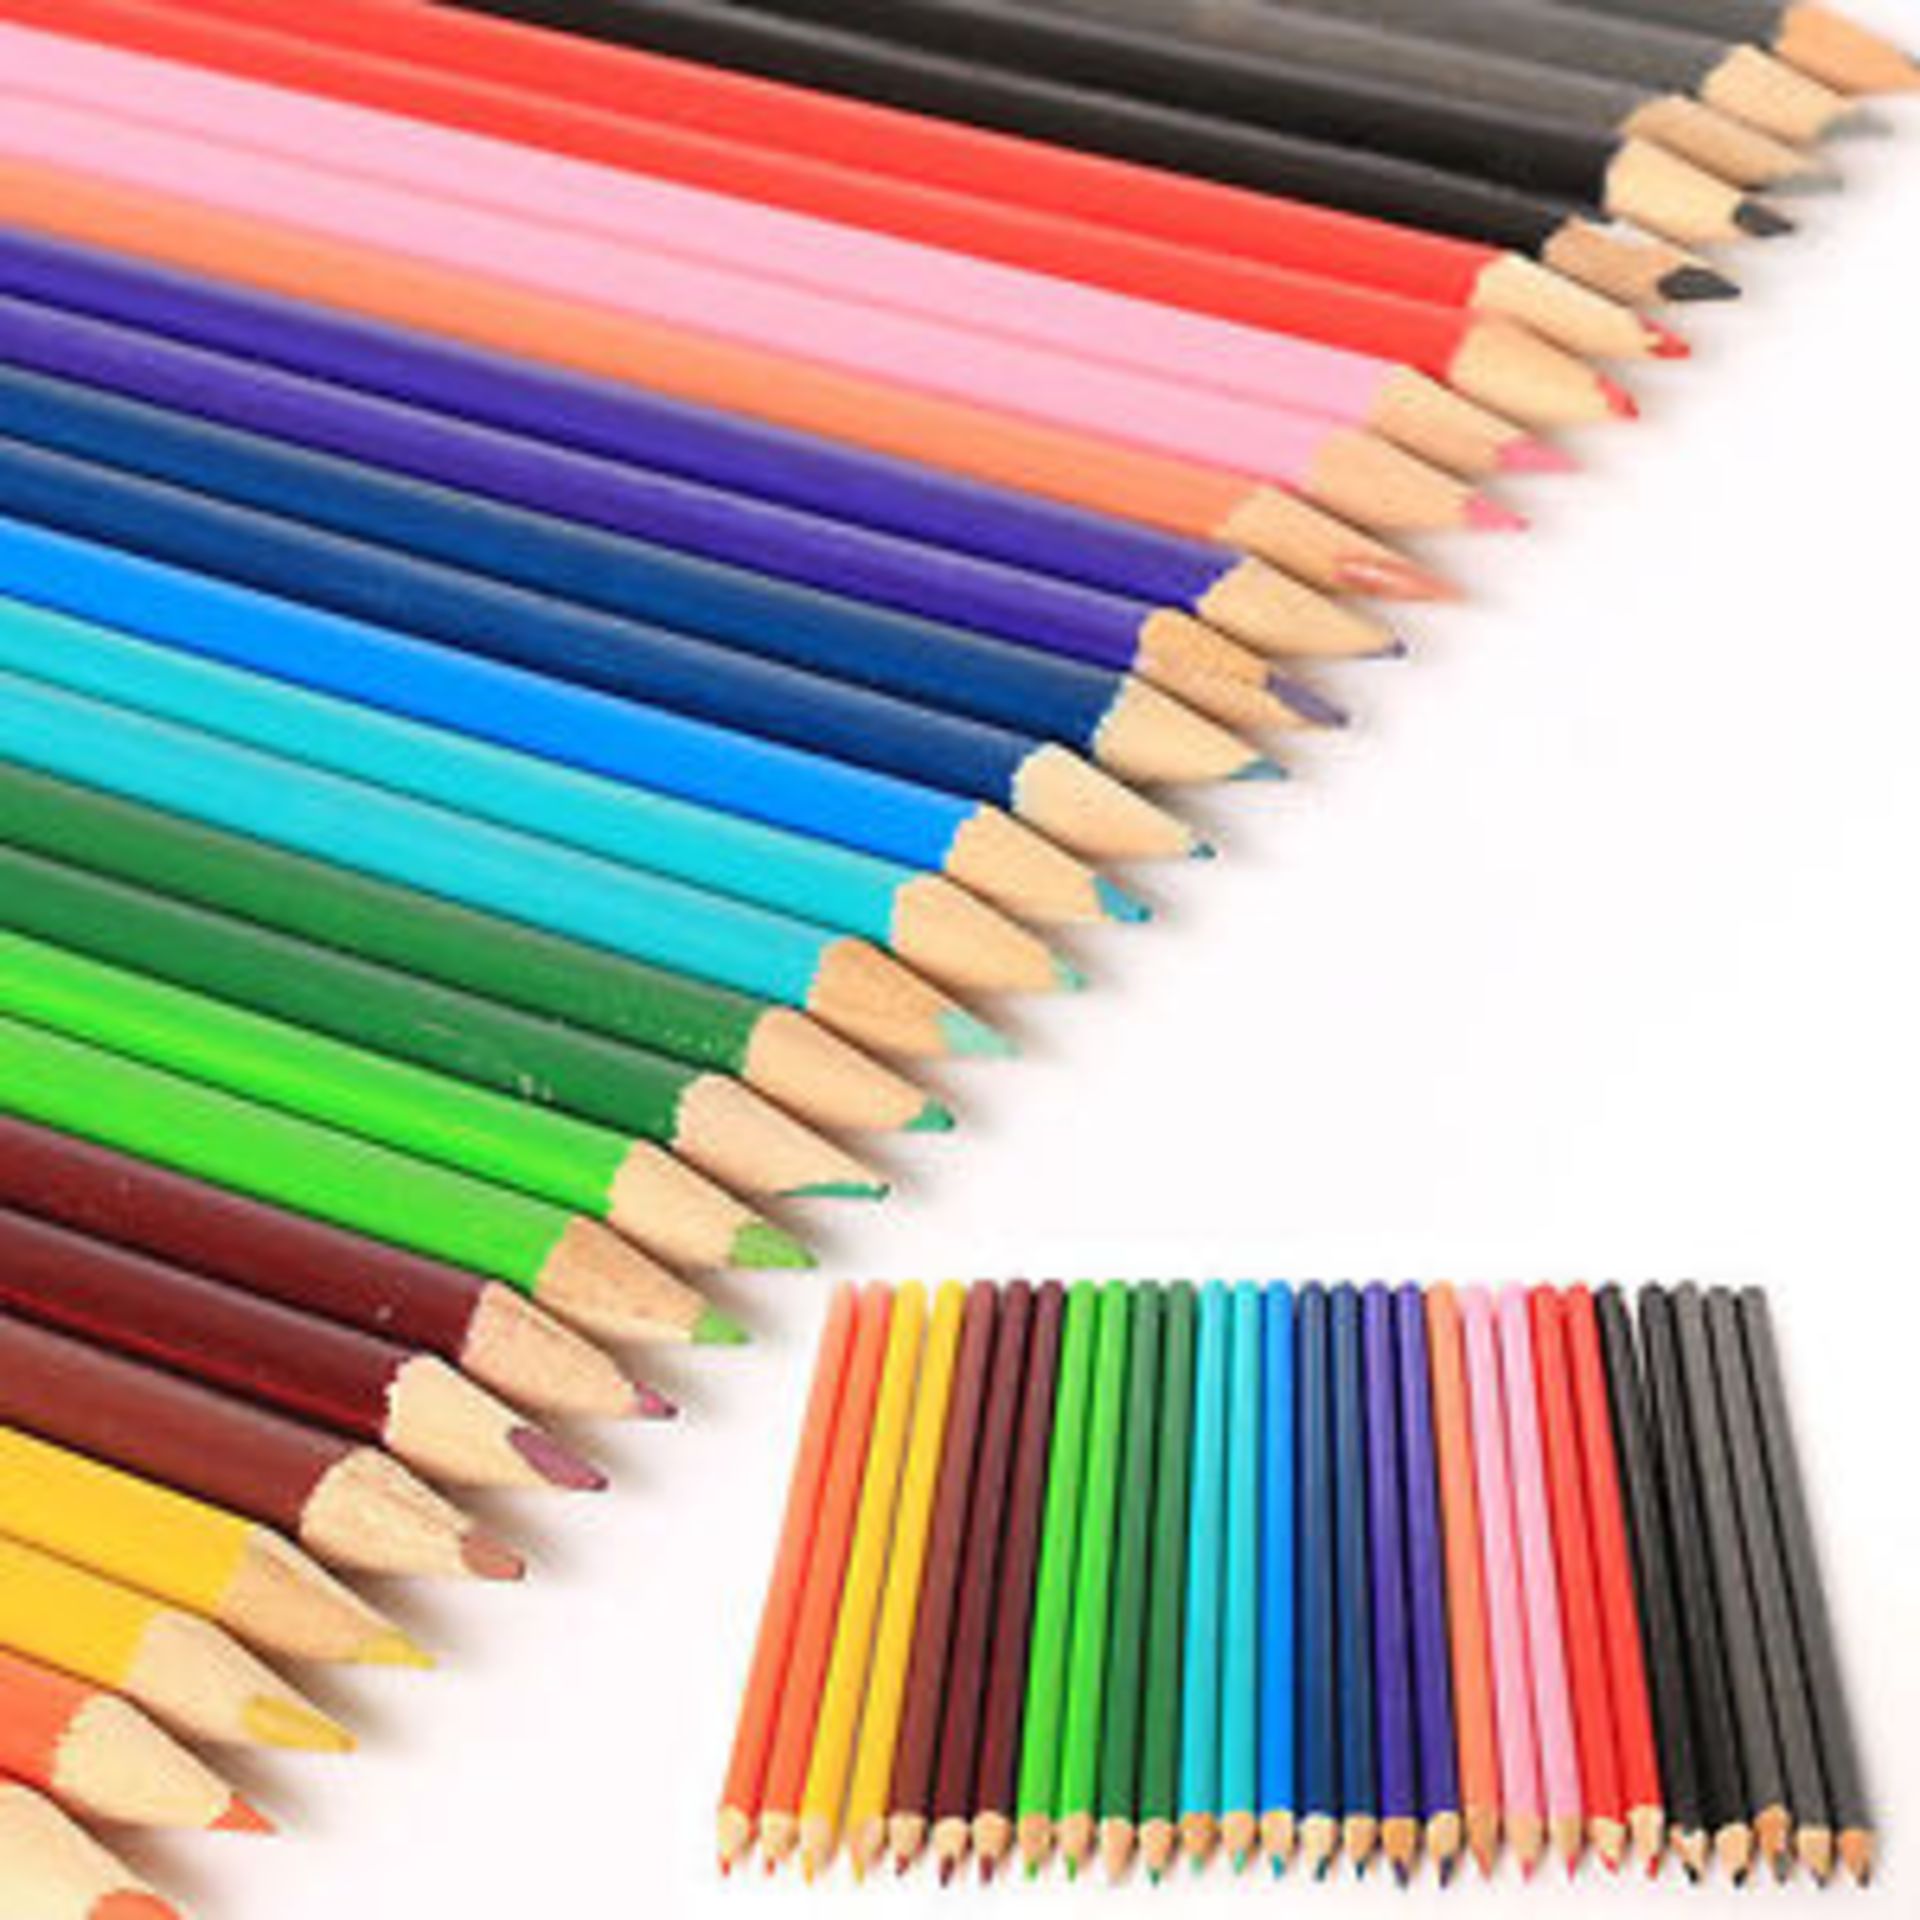 V Brand New 30 Pack Professional Colouring Pencils - Artist Quality X 2 YOUR BID PRICE TO BE - Image 2 of 2